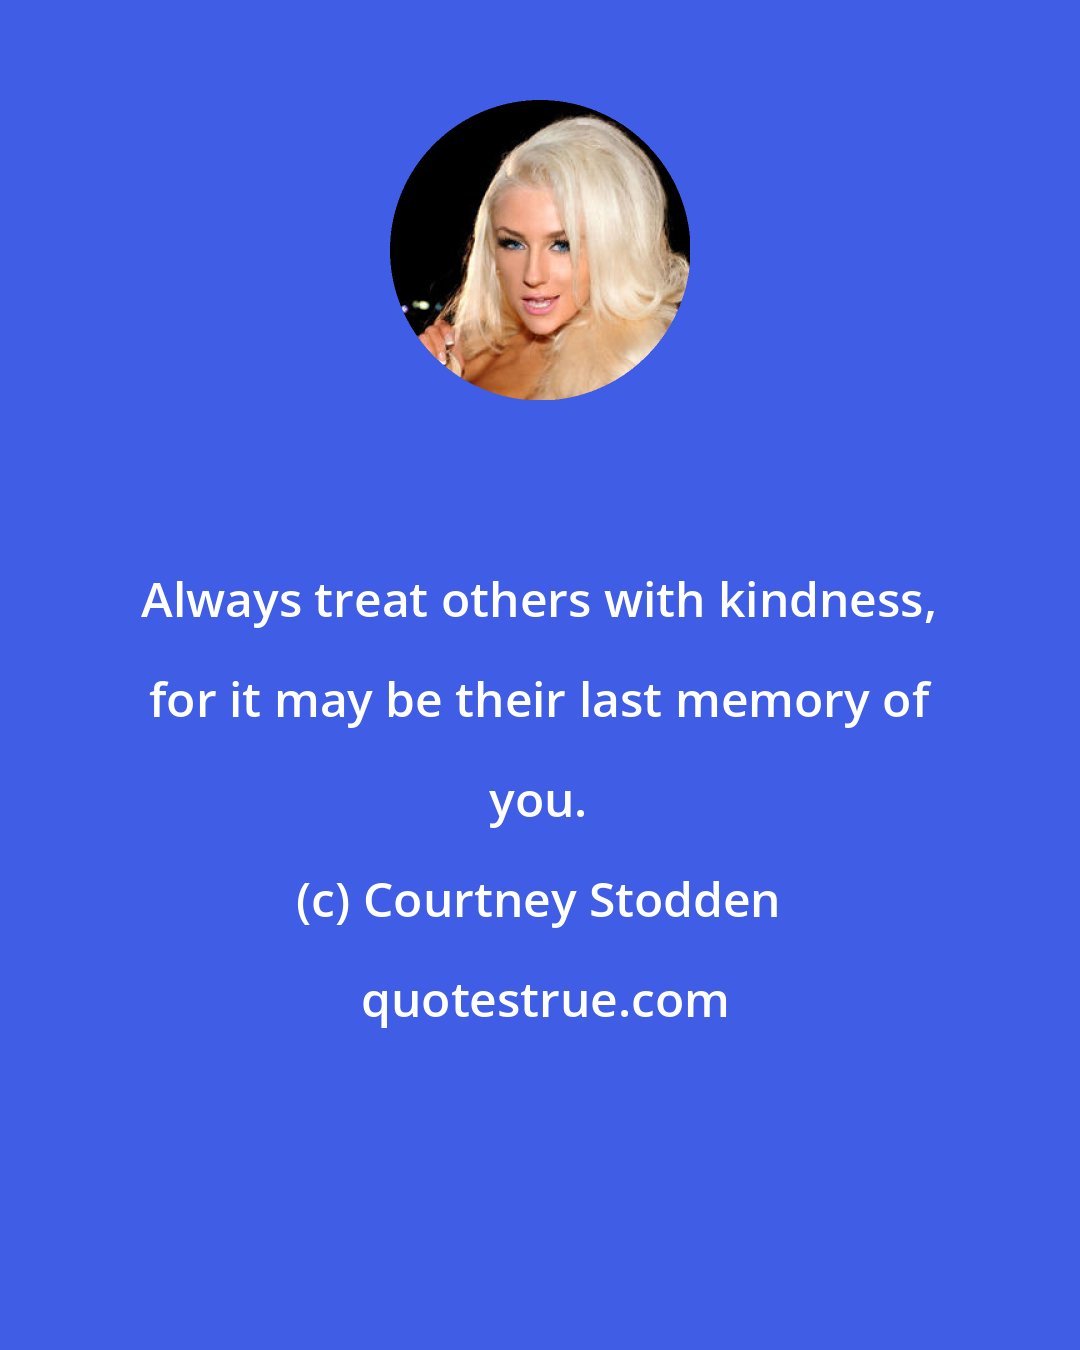 Courtney Stodden: Always treat others with kindness, for it may be their last memory of you.